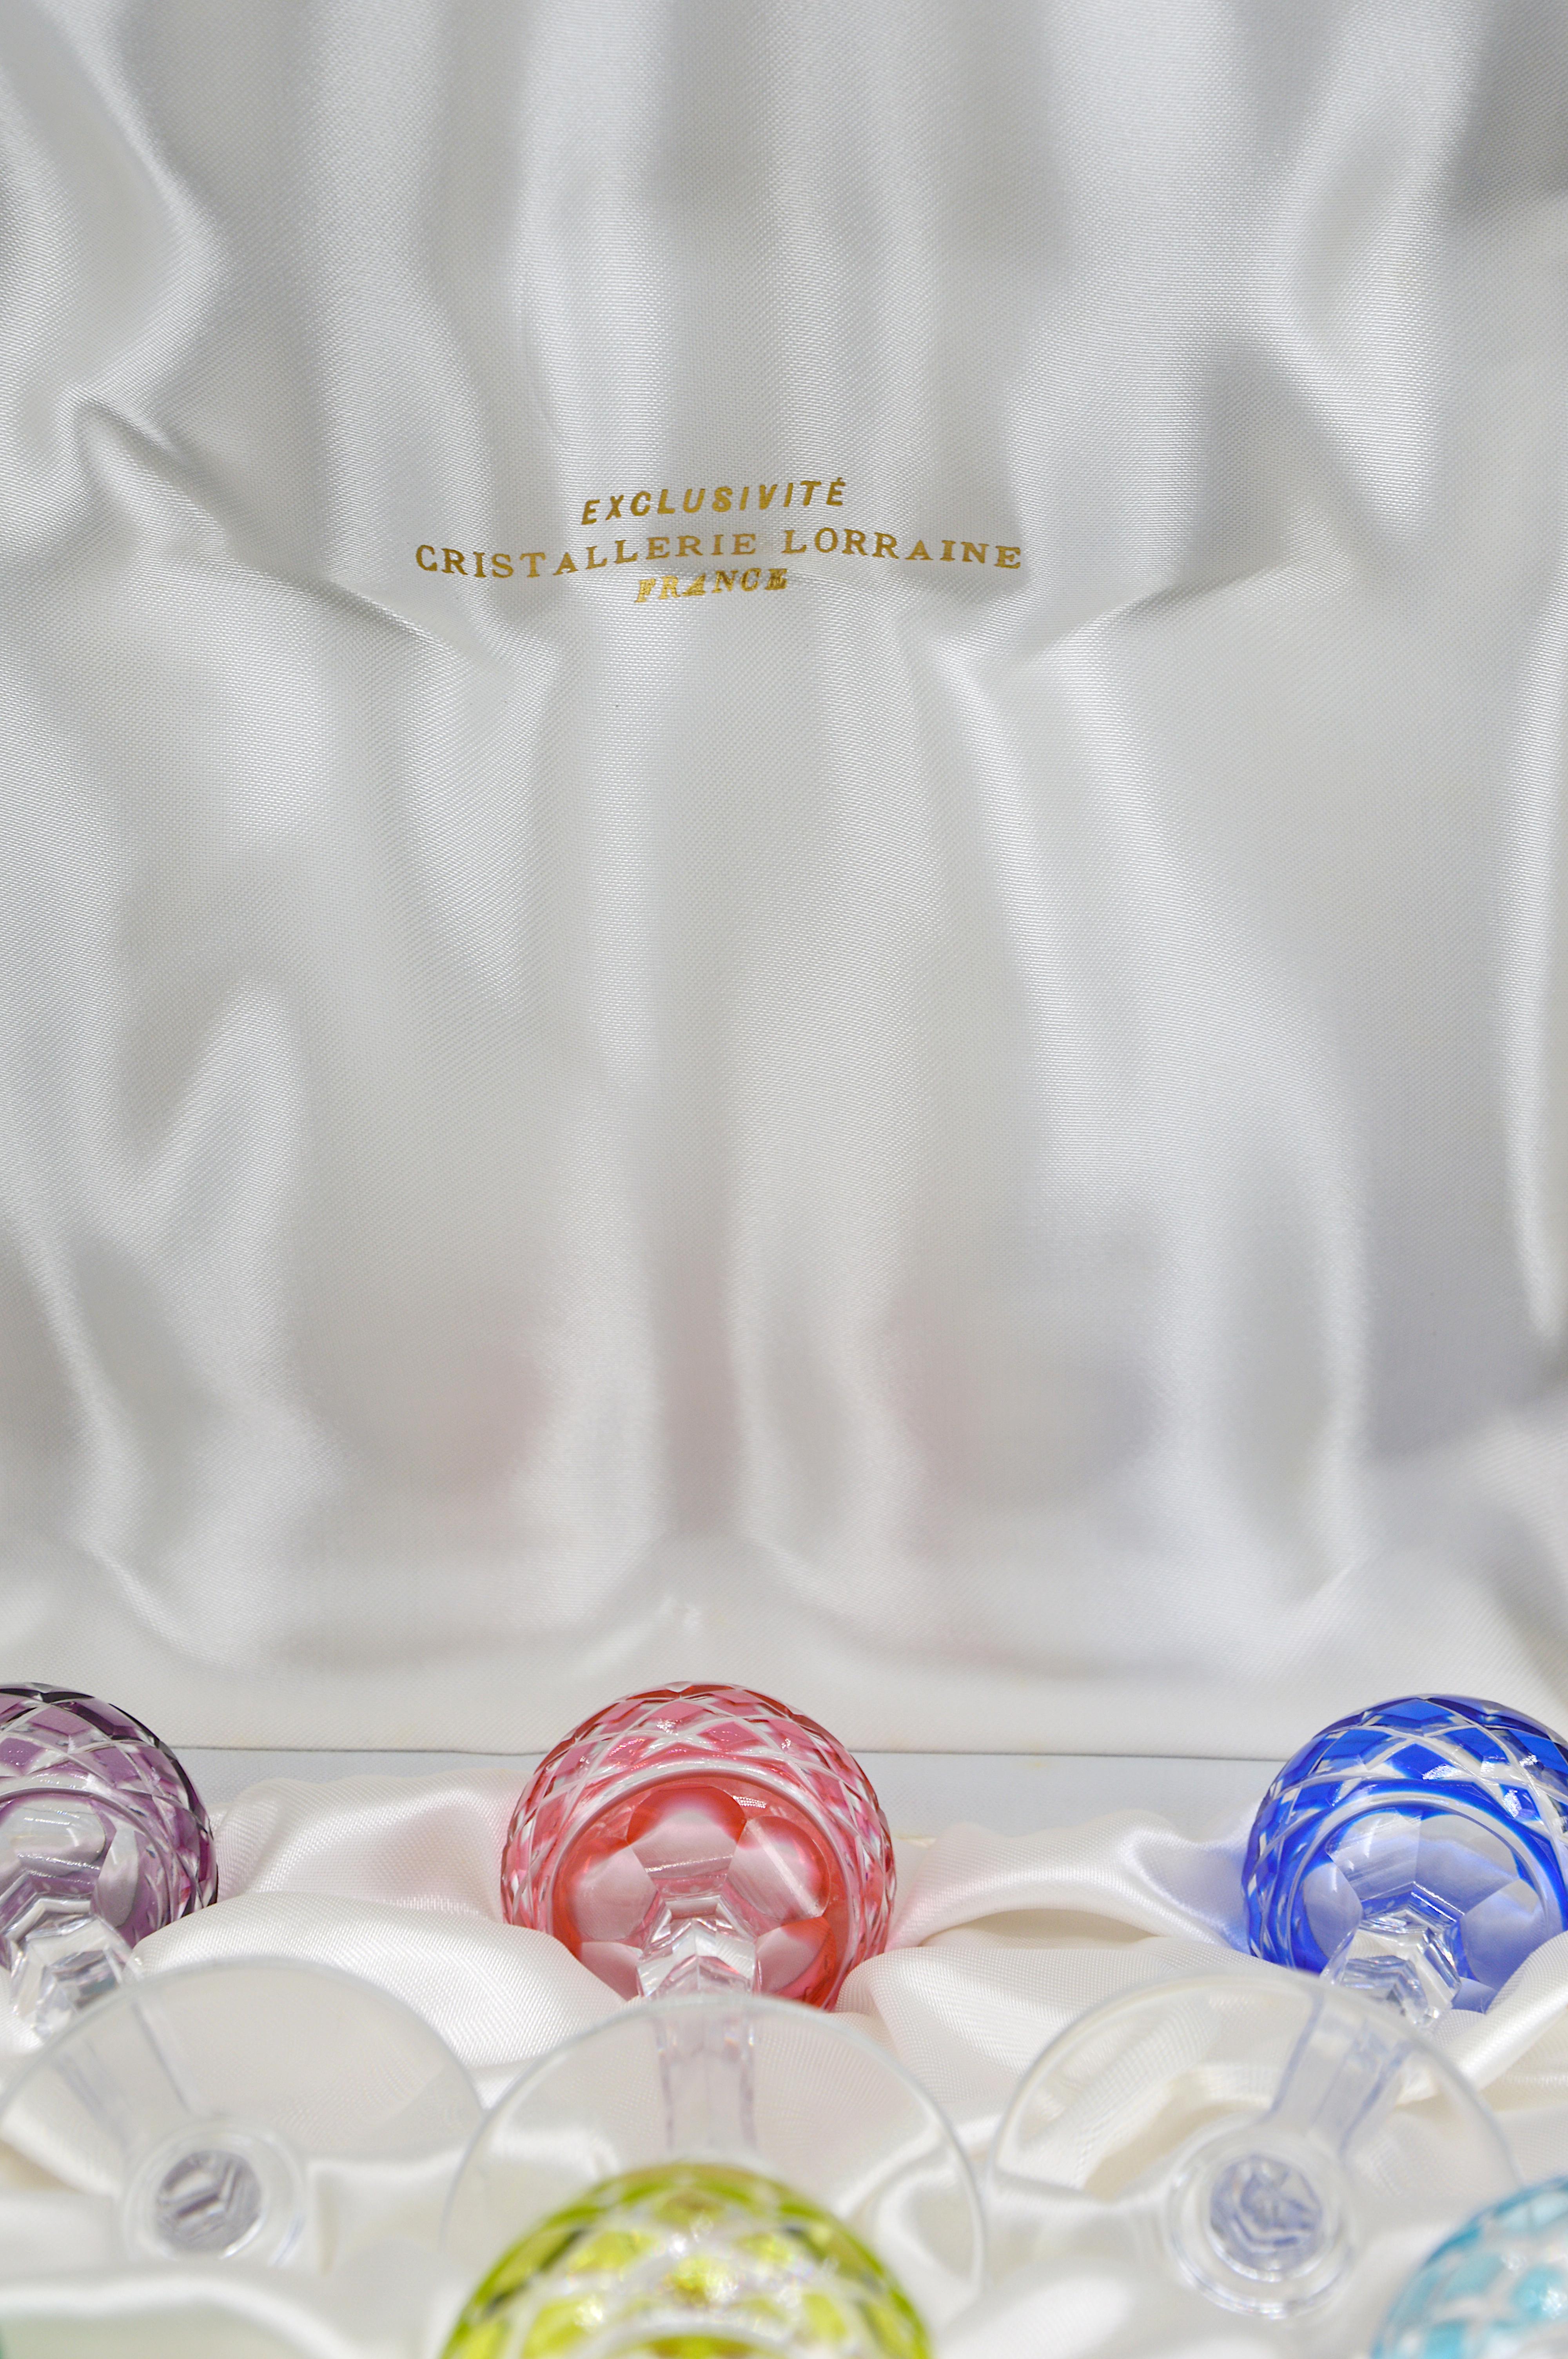 French Cristallerie Lorraine Set of 6 Colored Crystal Glasses in Their Box France, 1920